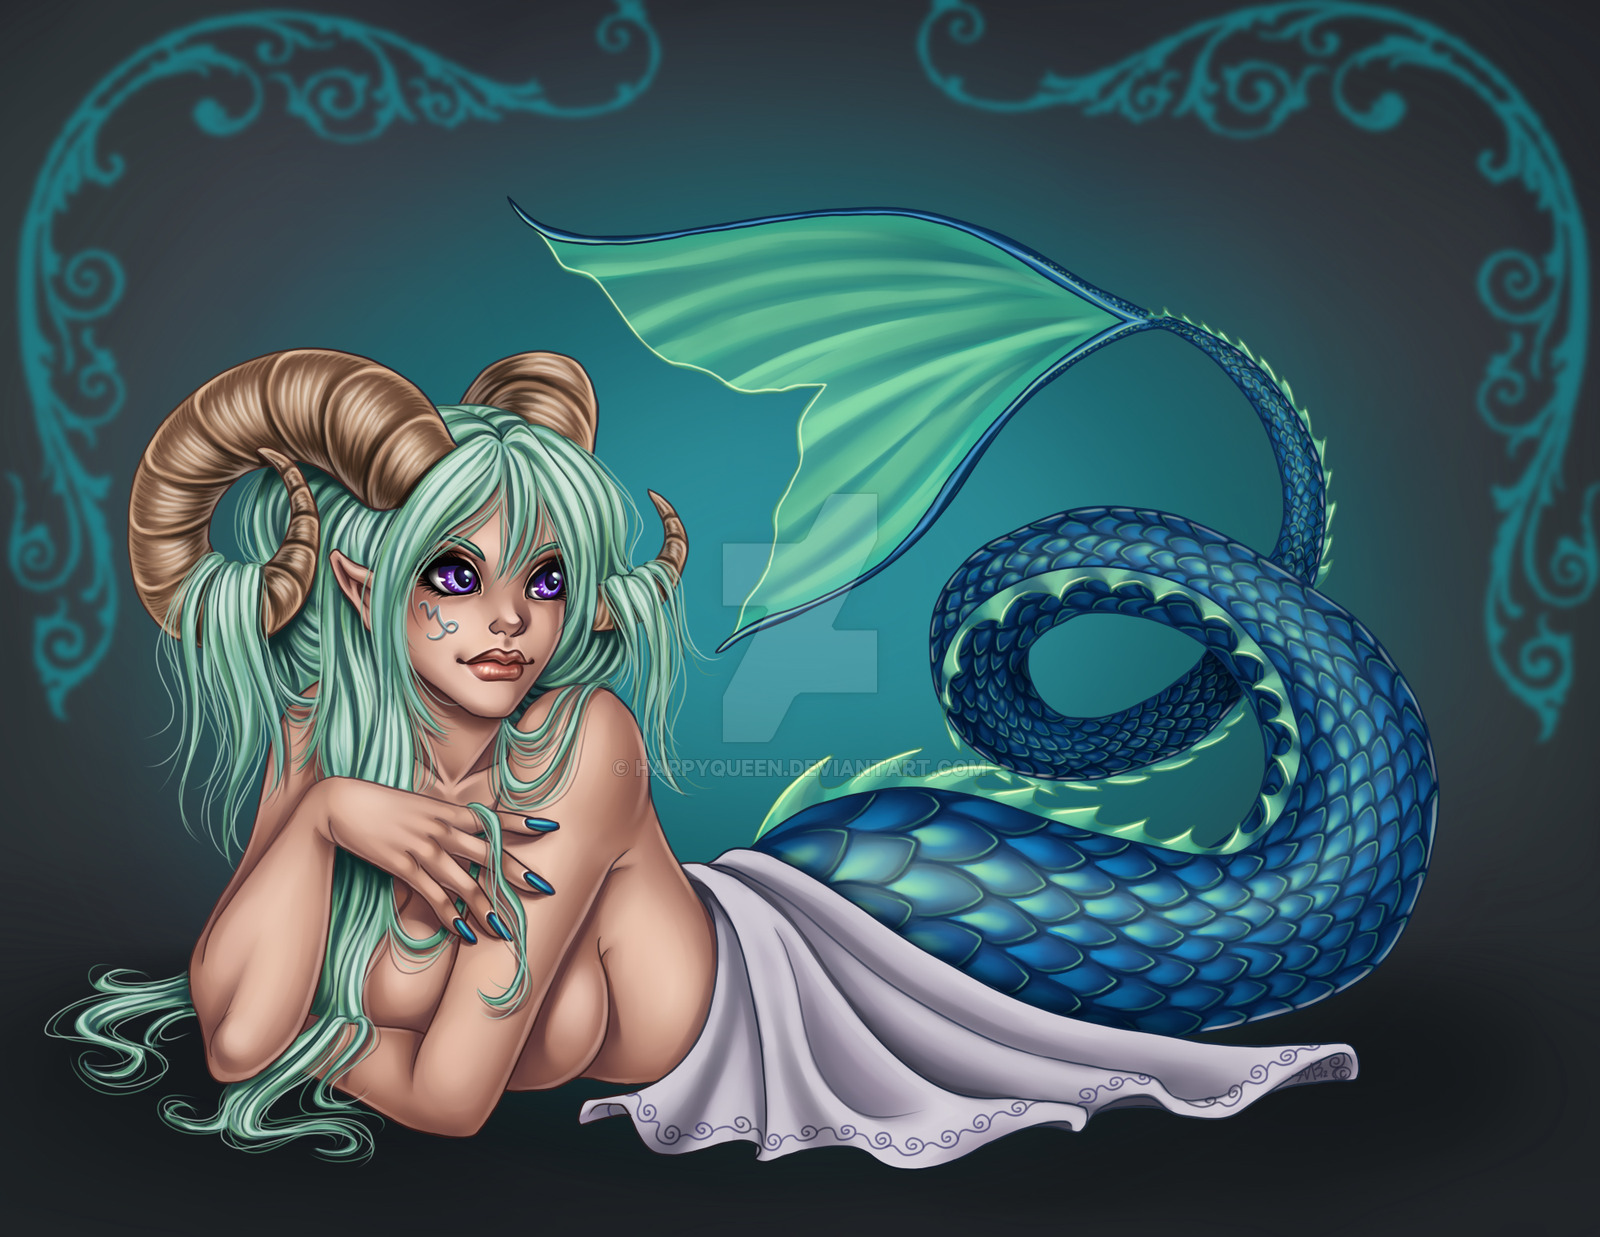 capricorn_commission_by_harpyqueen-d53i90o